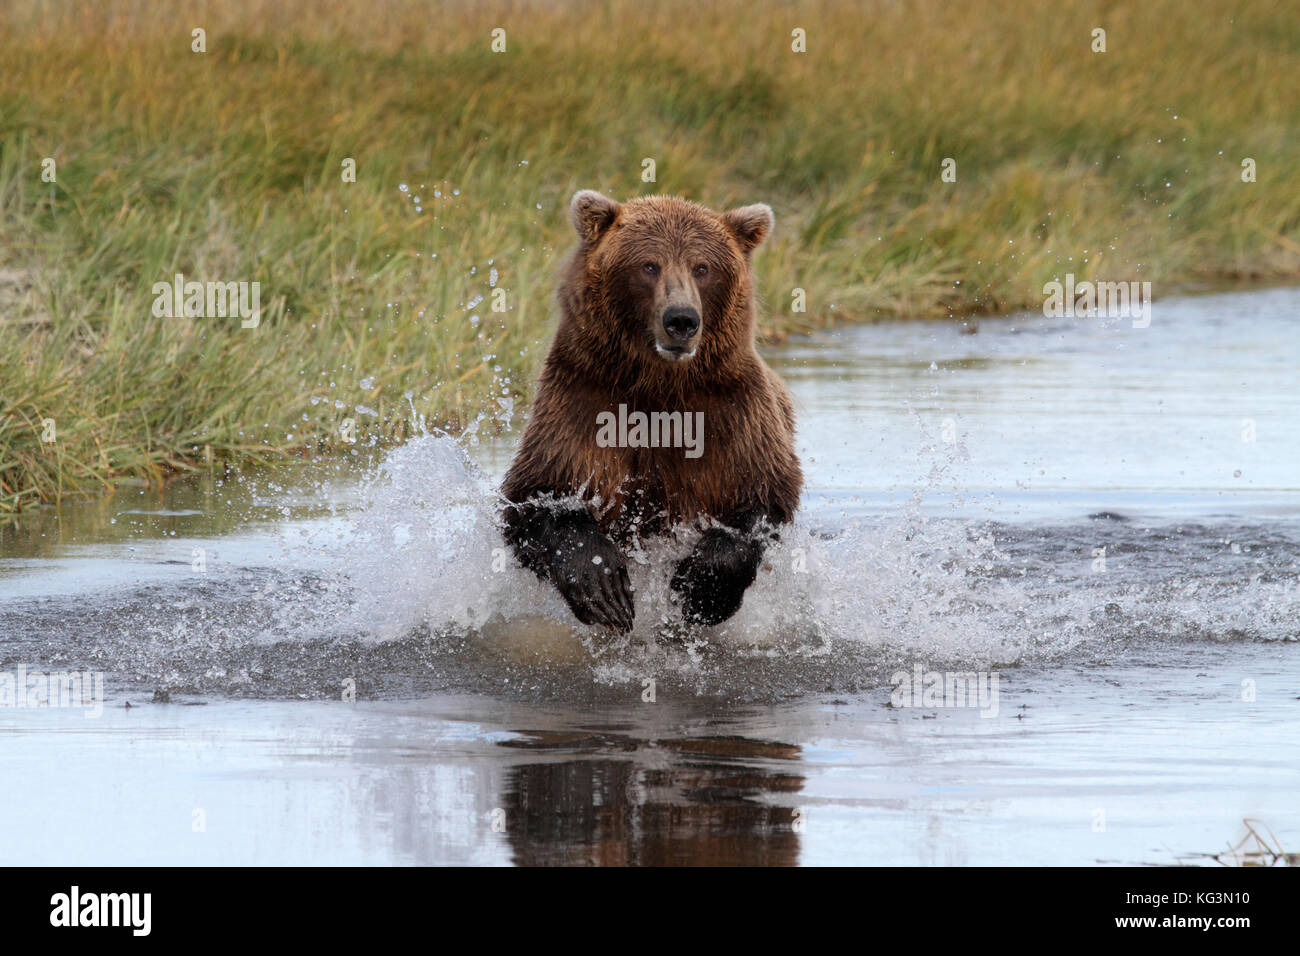 An Alaska brown bear, or grizzly, charges through the water in pursuit of salmon in Katmai National Park in Alaska. Stock Photo